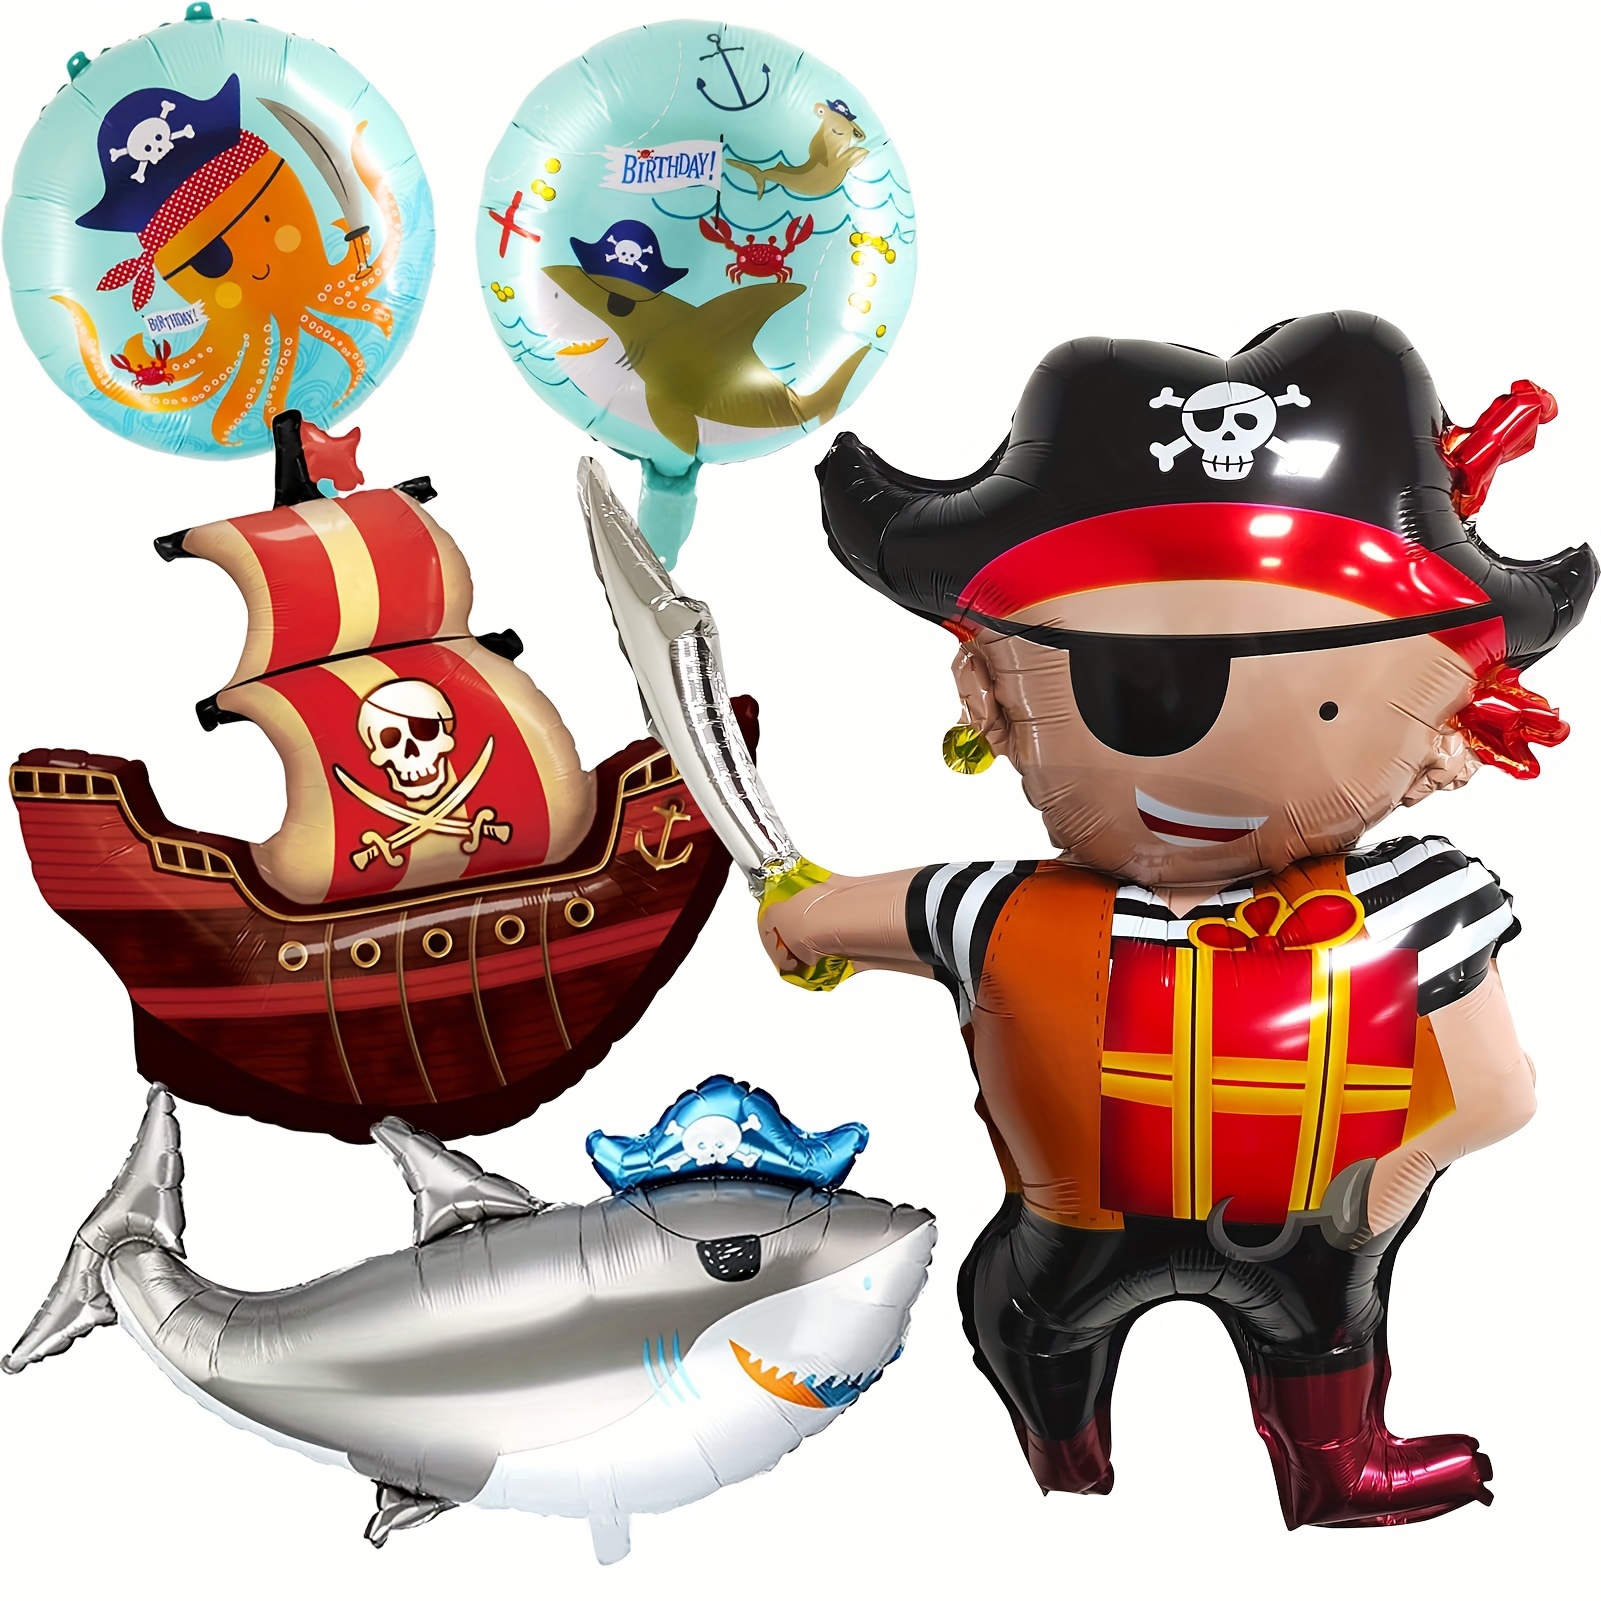 

Pirate Ship Balloons Set For Halloween And Birthday Party Decorations, Ocean Animal Aluminum Film Balloons, Multiple Pirate Theme Balloon Packs For Ages 14+ - No Electricity Needed